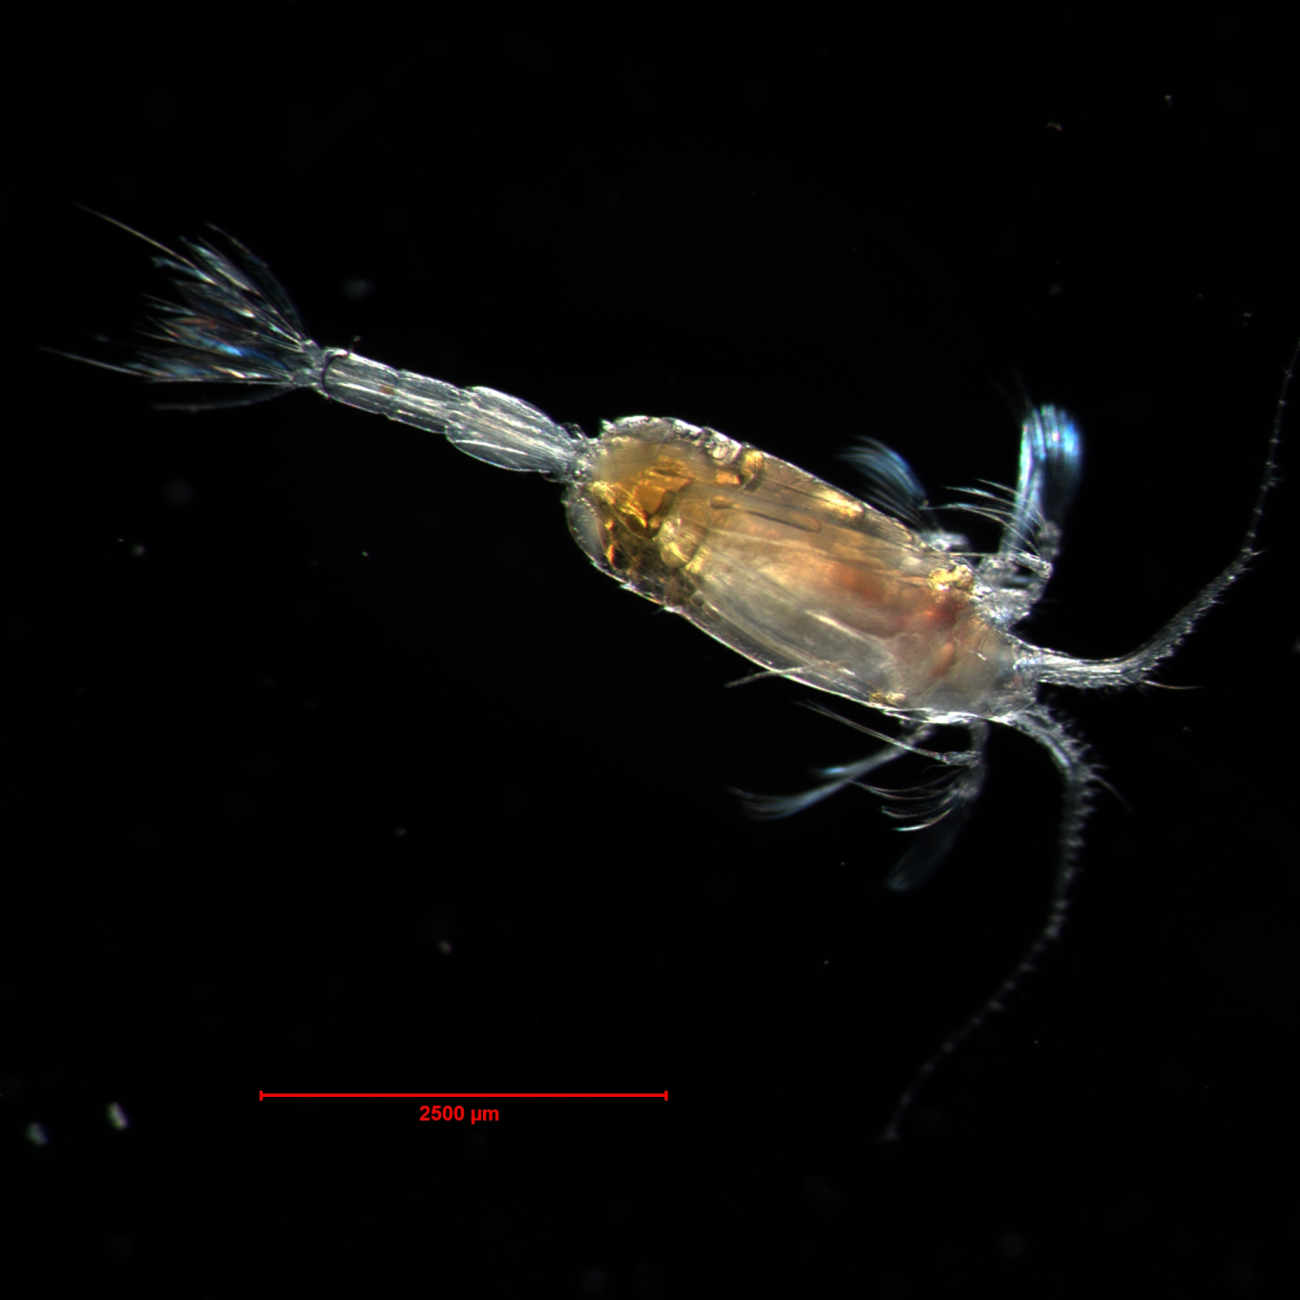 In many species of copepods, males are rare and short-lived